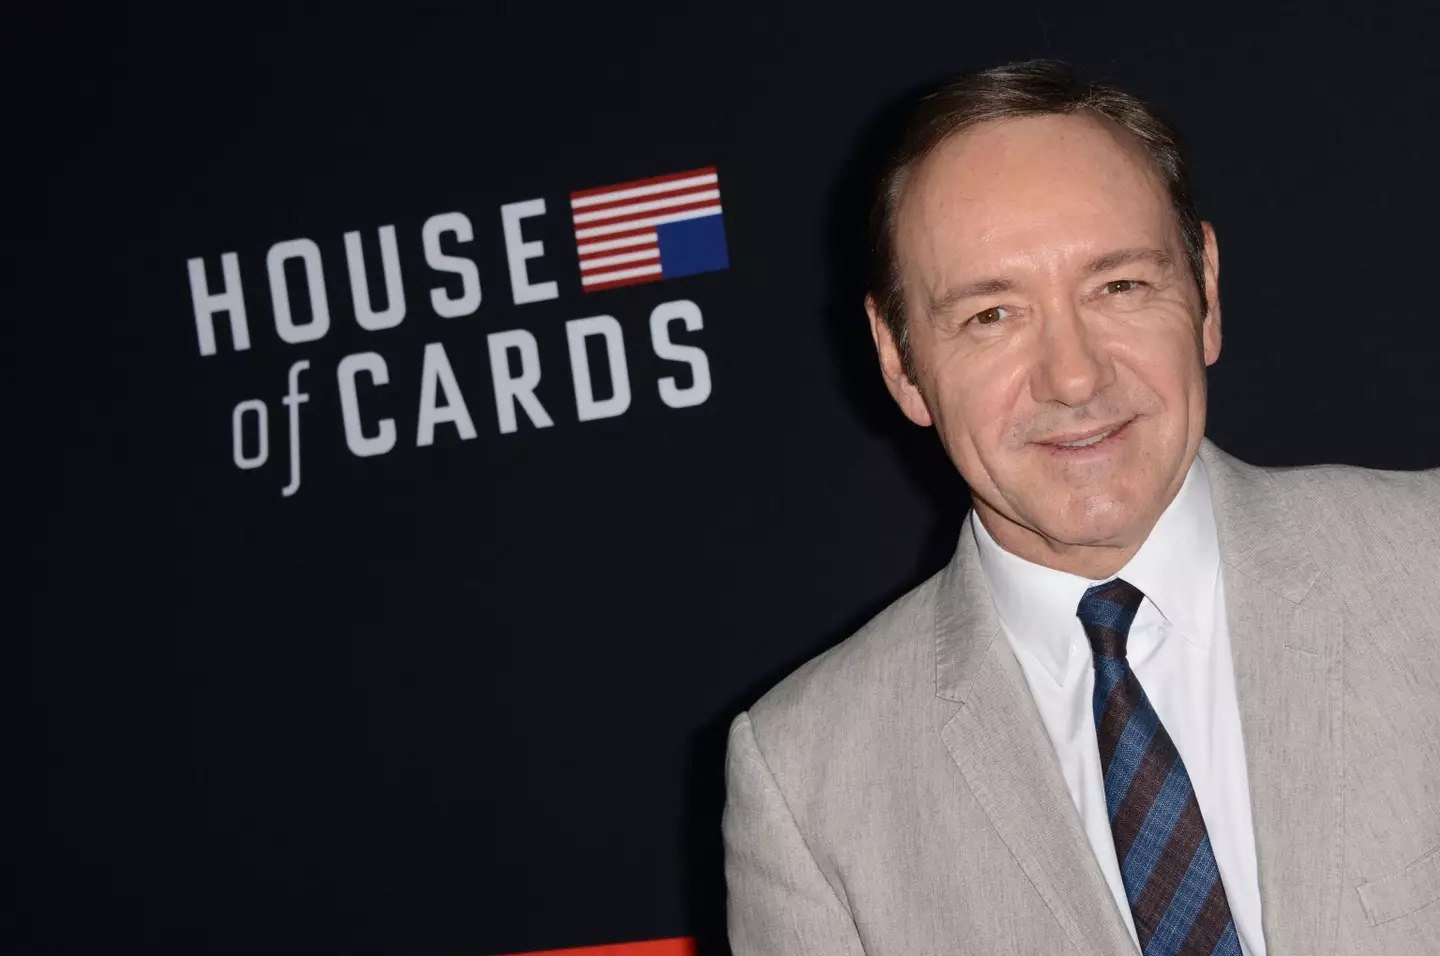 Spacey was sacked from House of Cards after the allegations emerged.